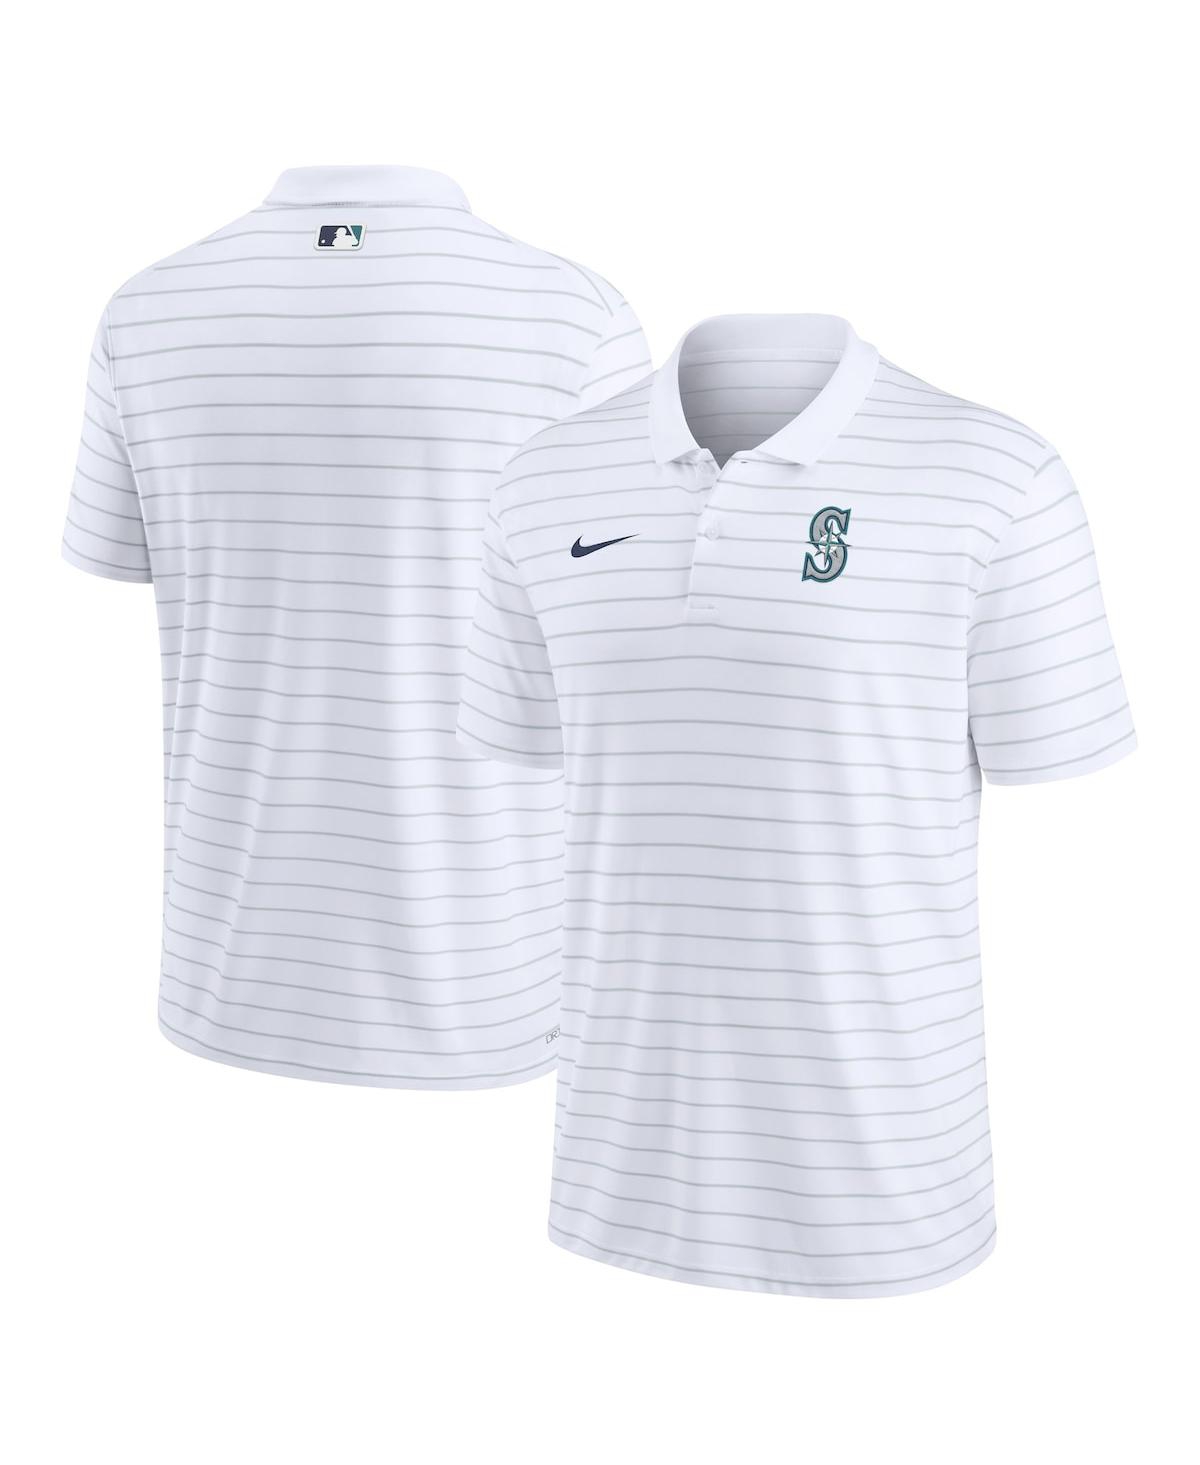 Men's Nike White Seattle Mariners Authentic Collection Victory Striped Performance Polo Shirt - White